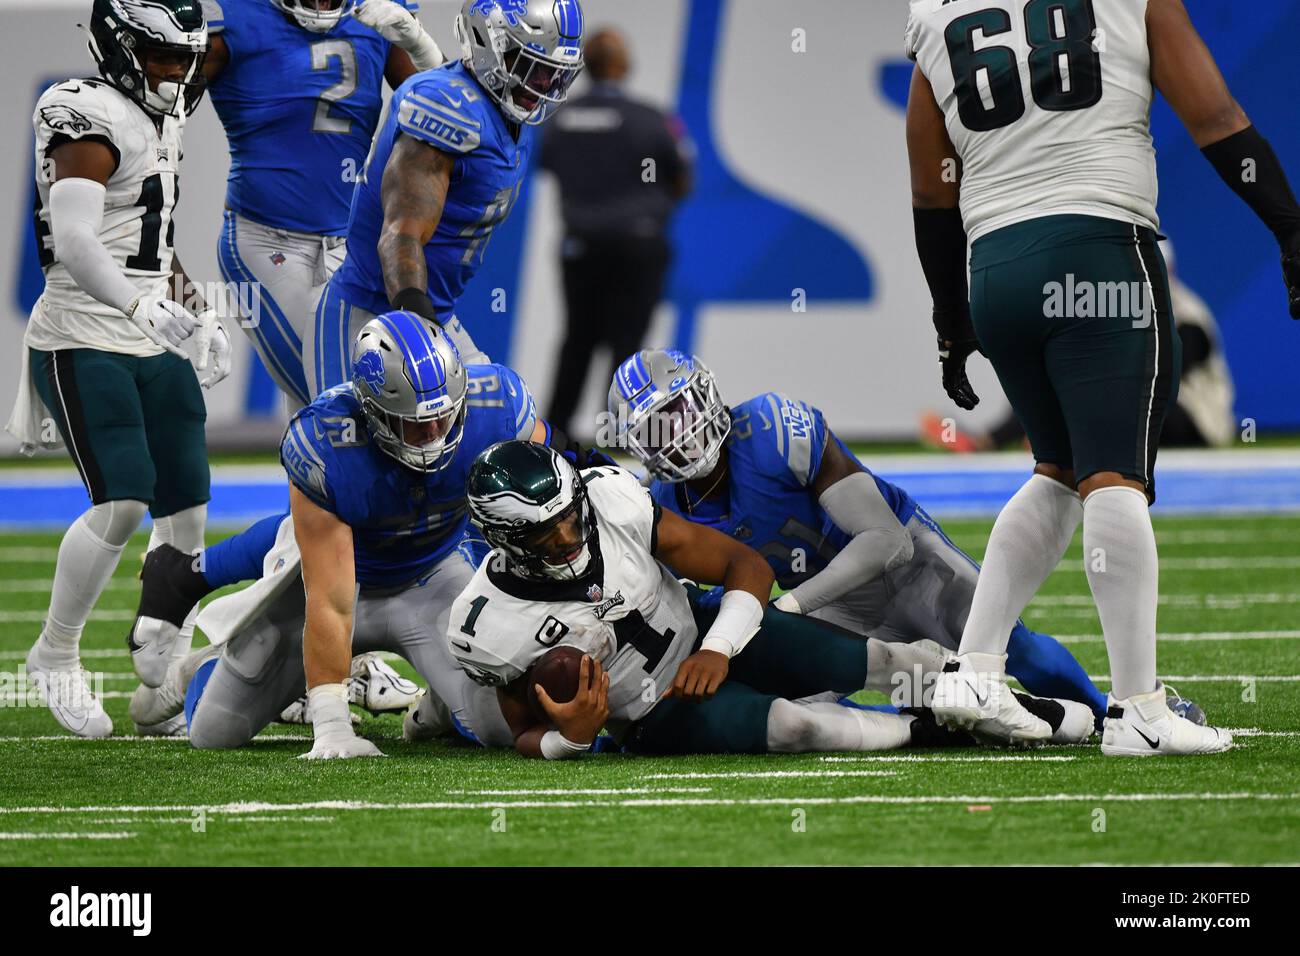 DETROIT, MI - SEPTEMBER 11: Philadelphia Eagles QB Jalen Hurts (1) gets sacked by Detroit Lions S Tracy Walker III (21) during the game between Philadelphia Eagles and Detroit Lions on September 11, 2022 at Ford Field in Detroit, MI (Photo by Allan Dranberg/CSM) Credit: Cal Sport Media/Alamy Live News Stock Photo